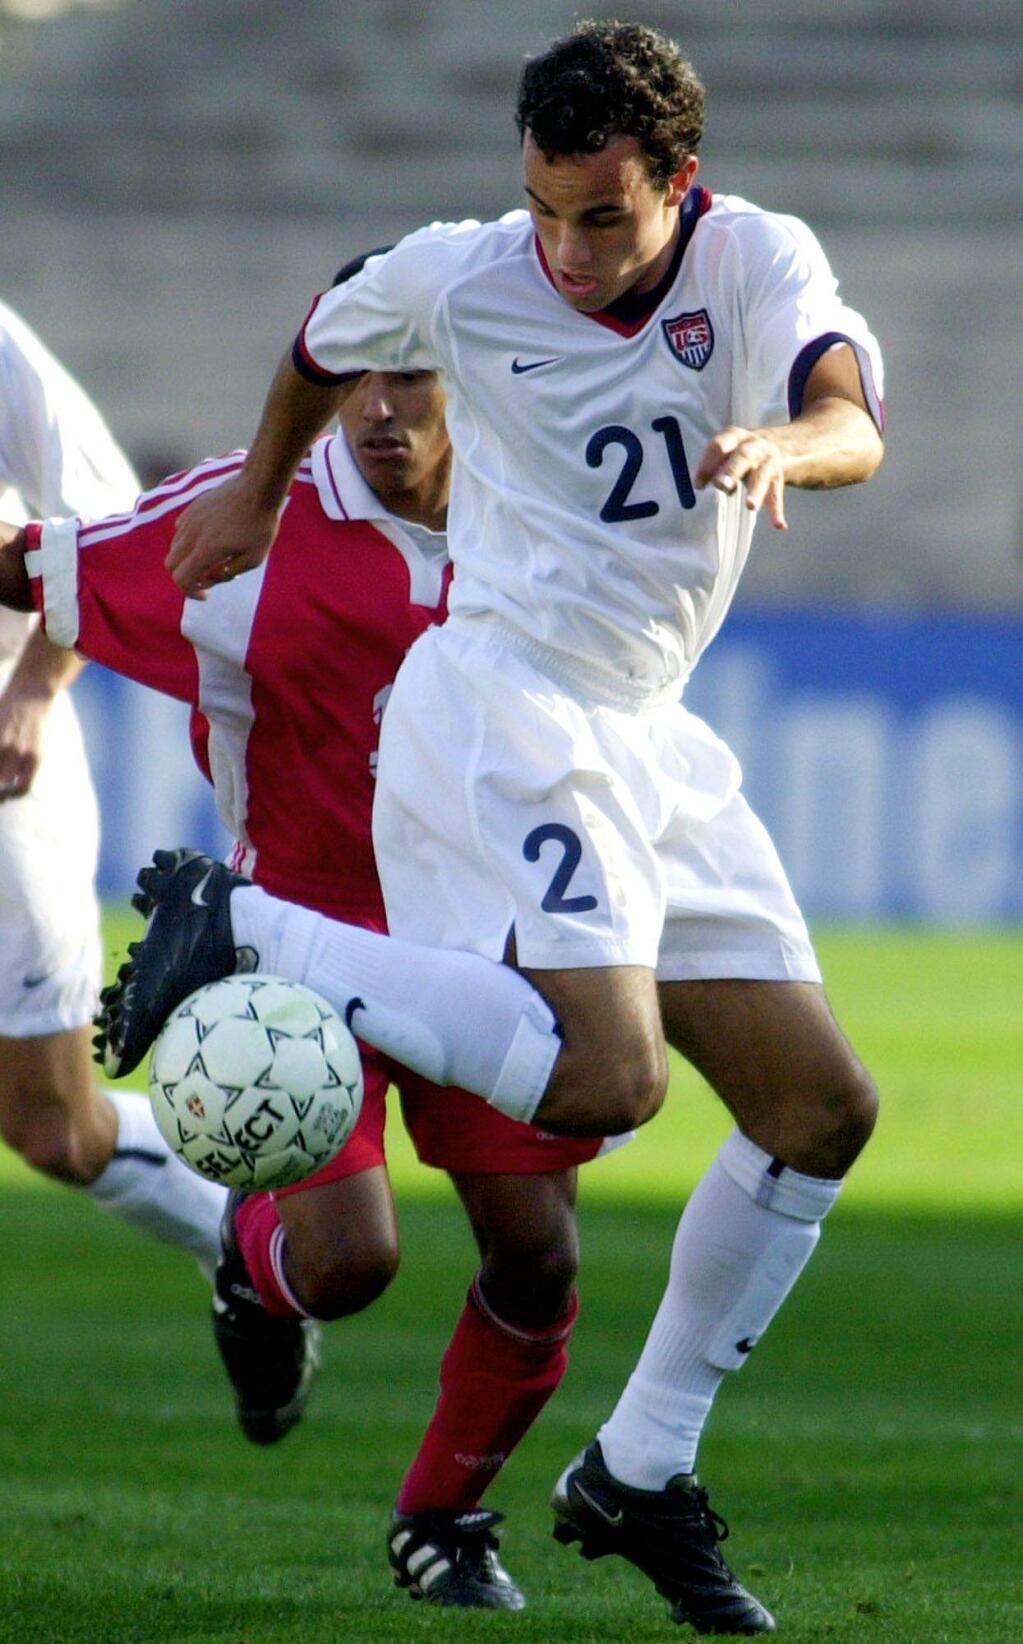 United States' Landon Donovan (21) stop the ball with his foot against Cuba's Chris Armas during the first half of Gold Cup soccer tournament at the Rose Bowl in Pasadena, Calif., Monday, Jan. 21, 2002. (AP Photo/Nick Ut)